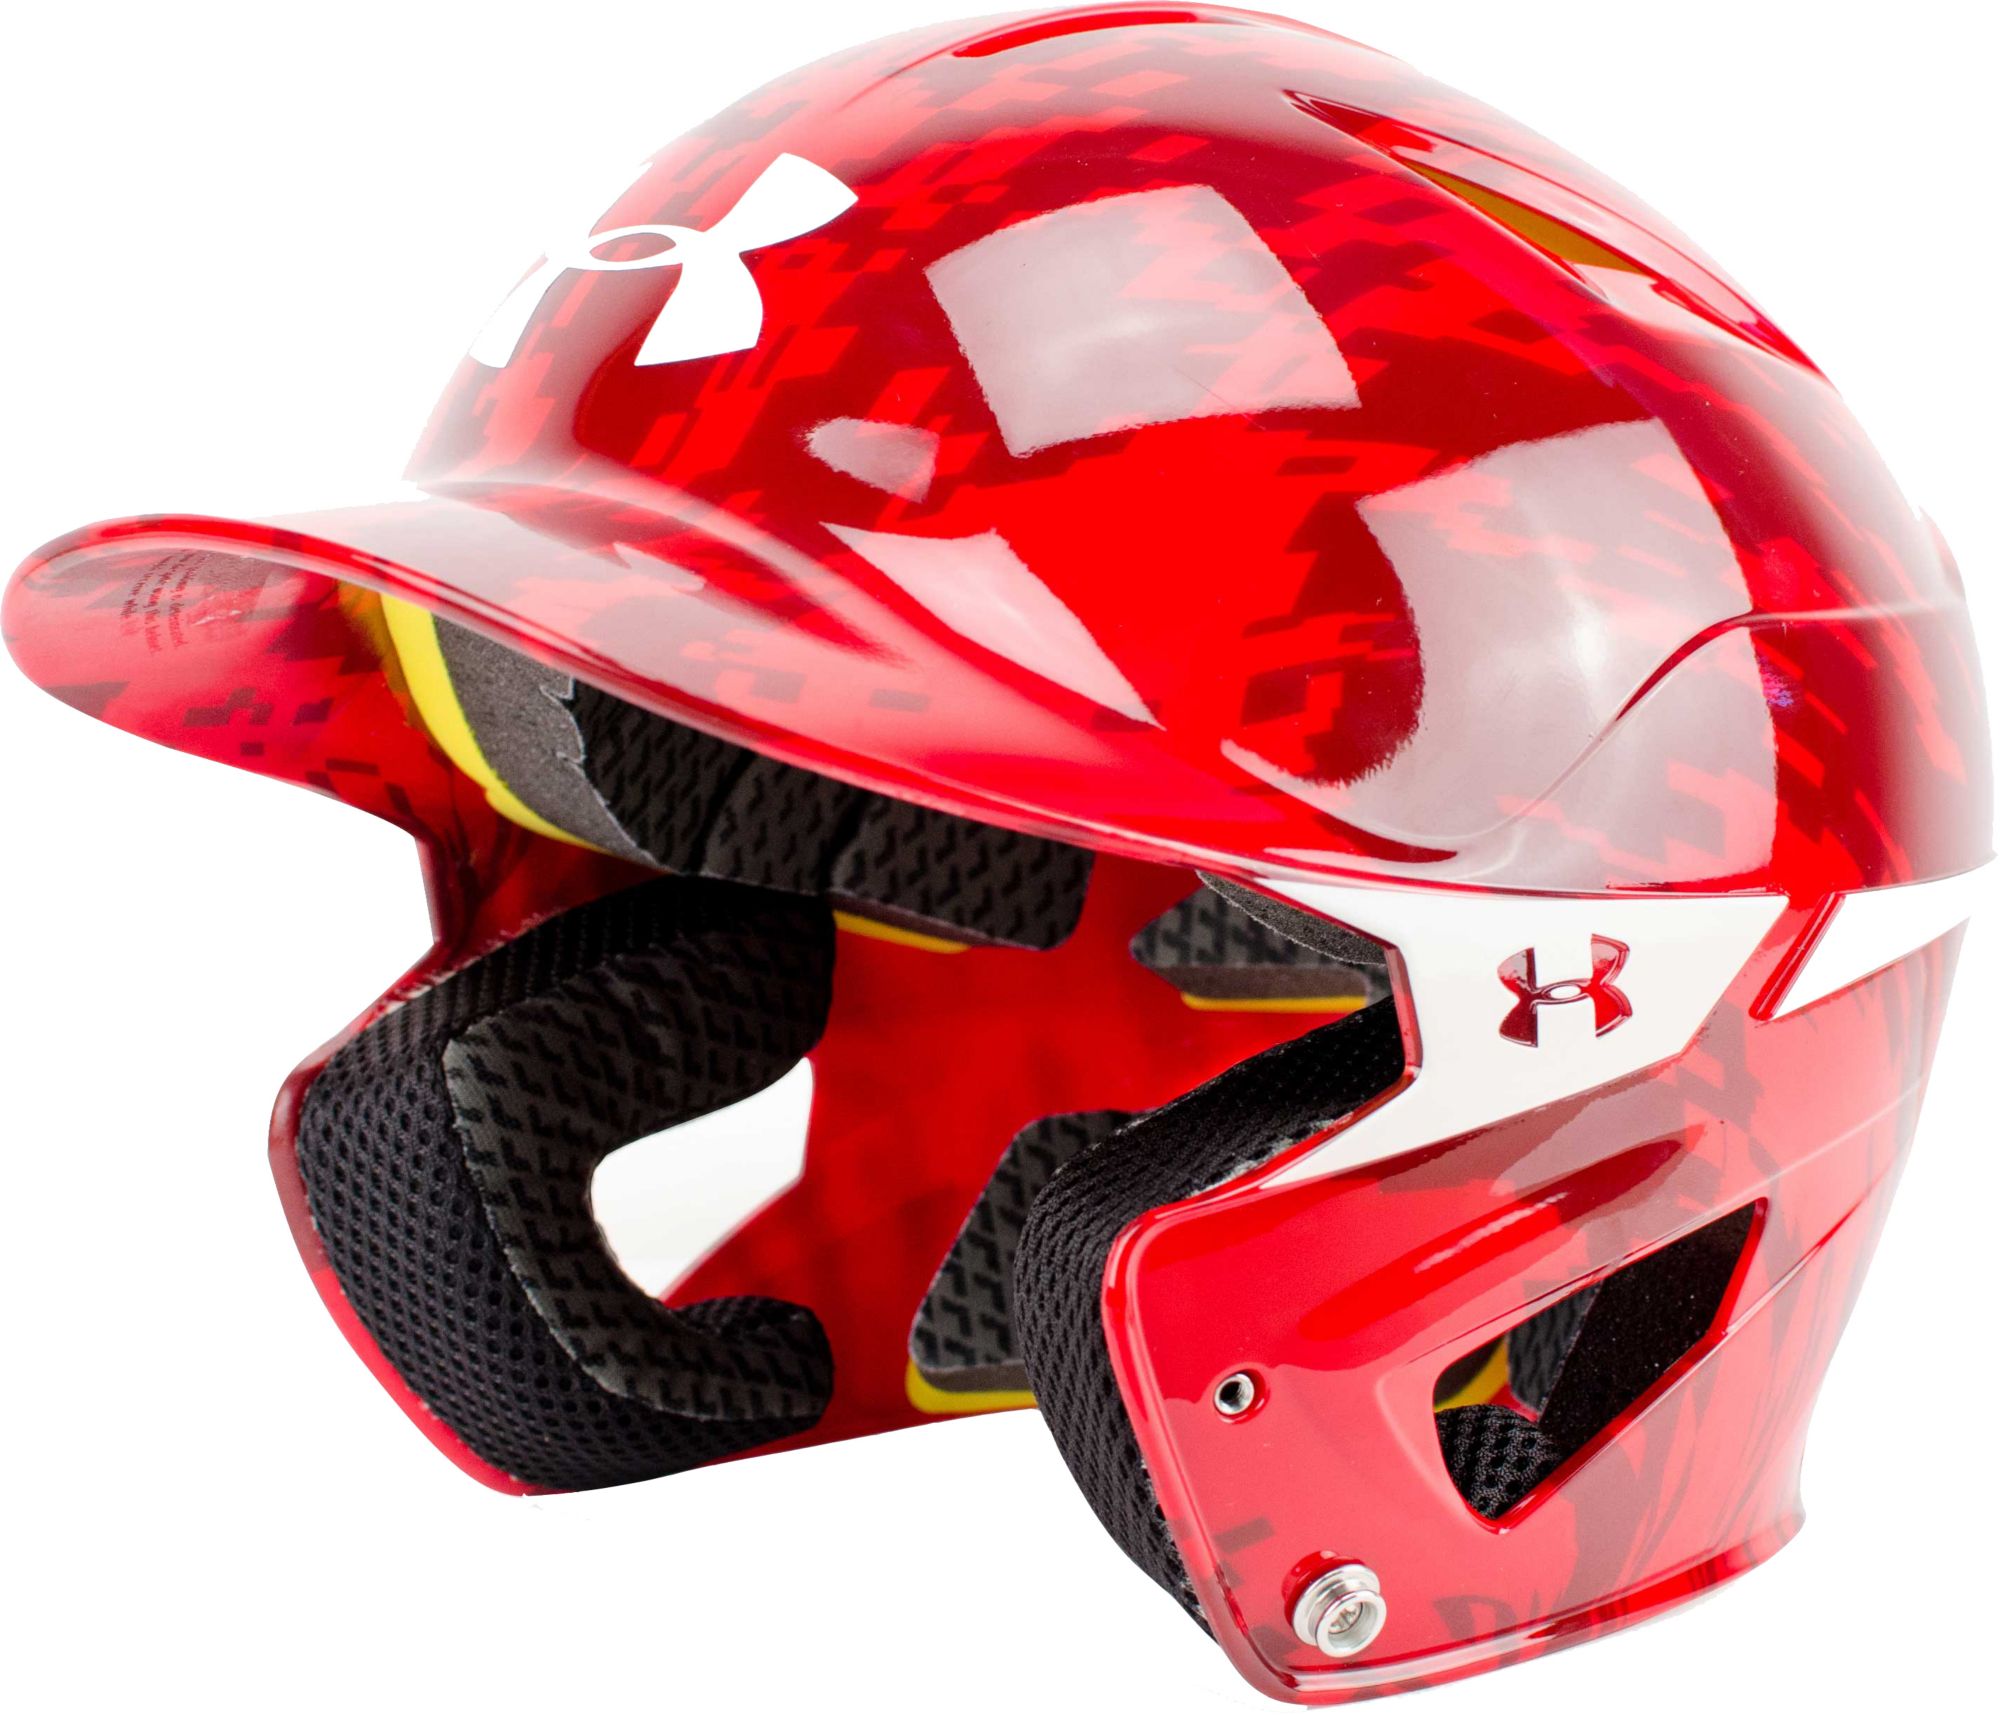 jaw guard for under armour baseball helmet